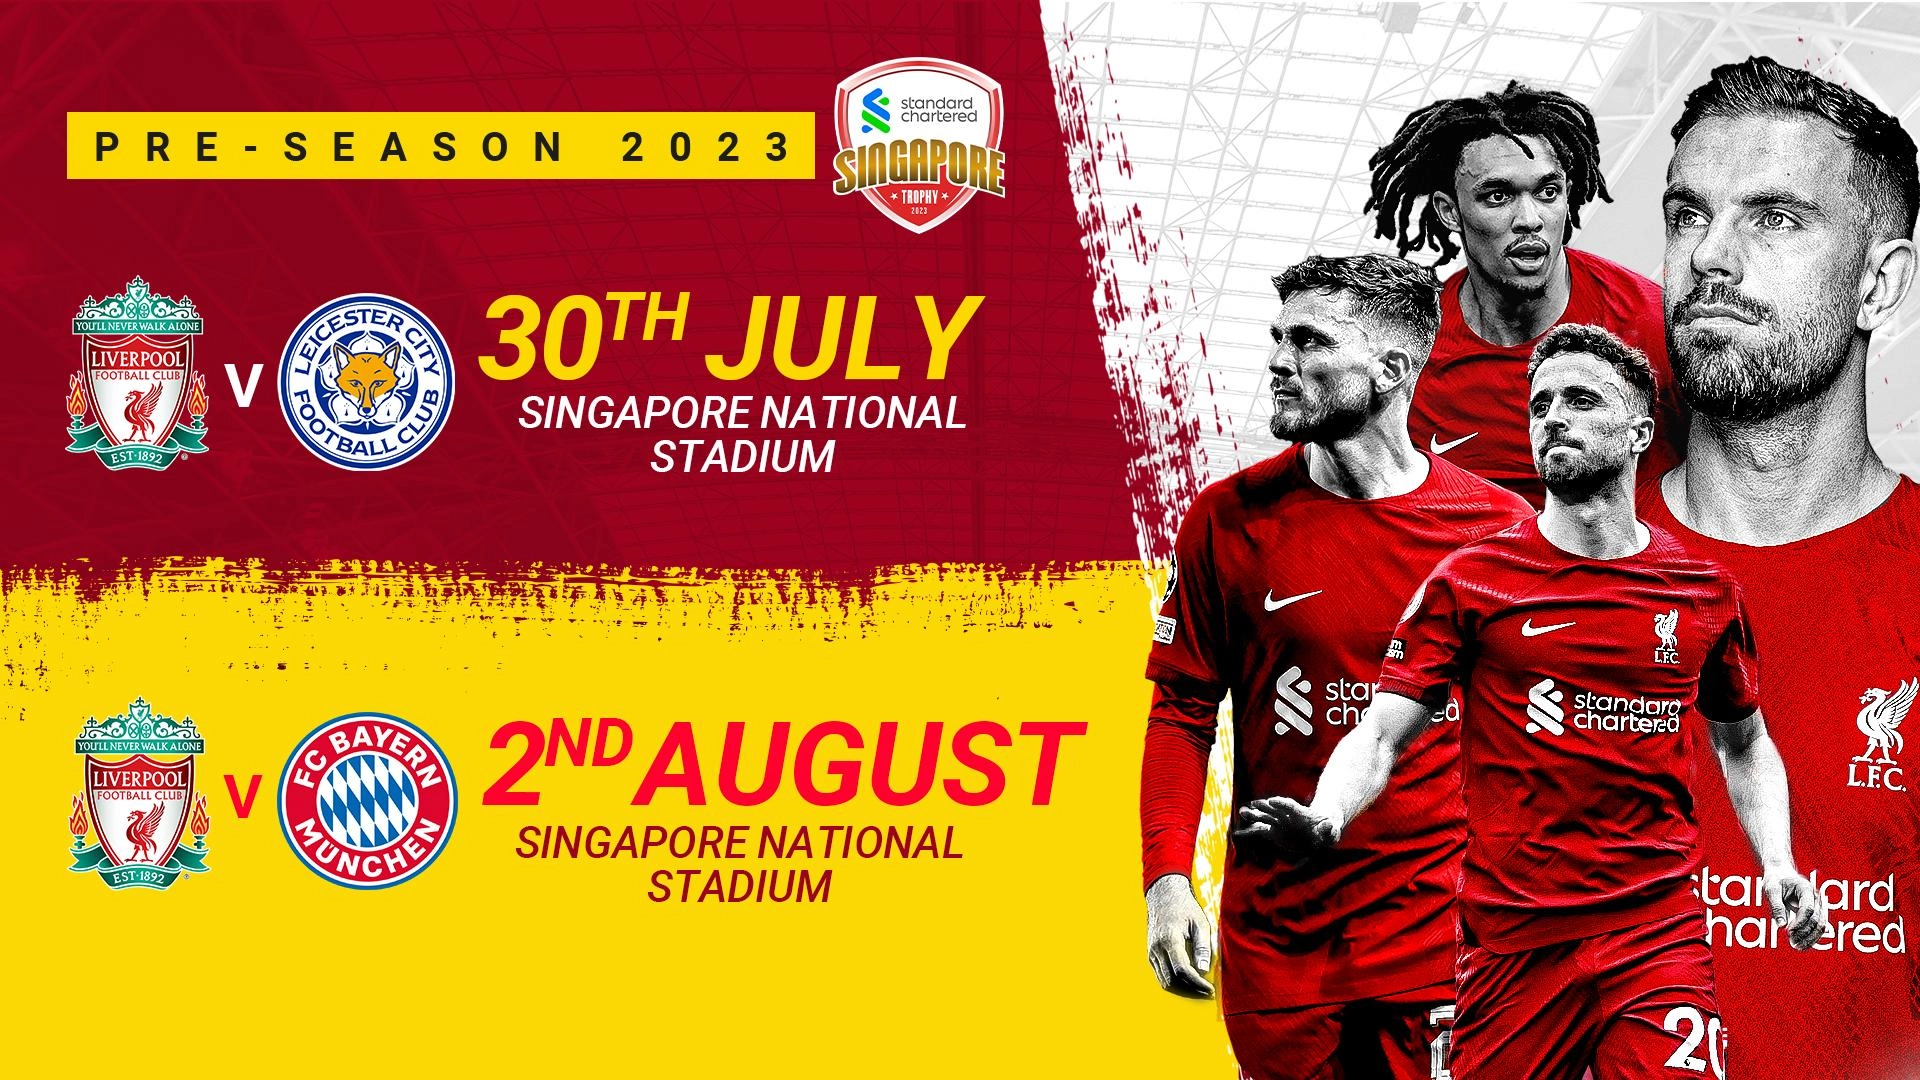 Tickets for LFCs pre-season matches in Singapore now on general sale